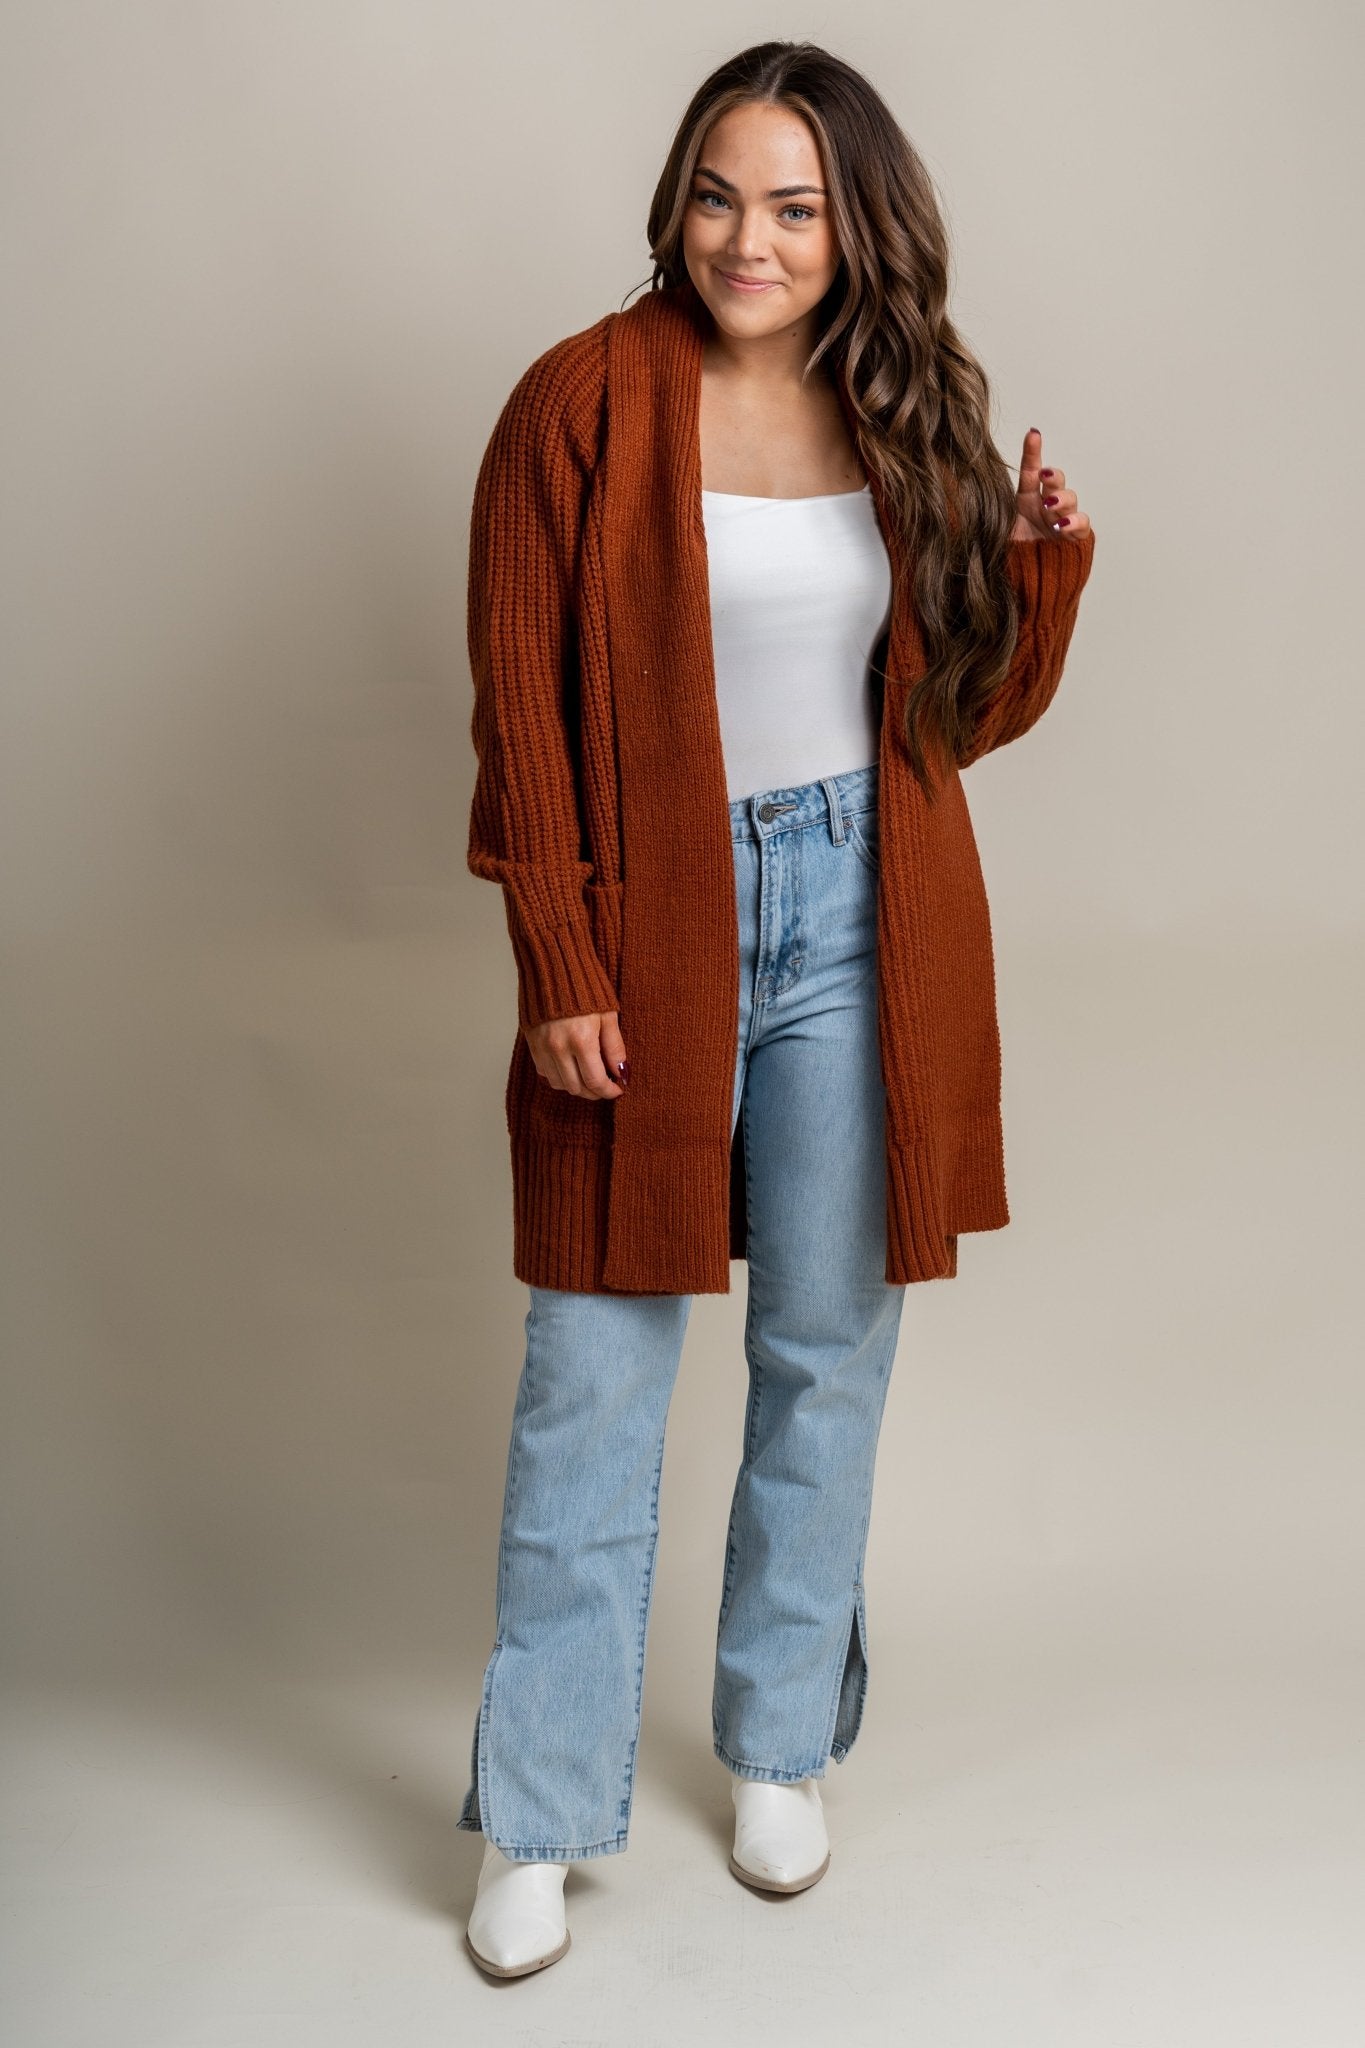 Open front knit cardigan chestnut - Trendy Cardigan - Fashion Cardigans & Cute Kimonos at Lush Fashion Lounge Boutique in Oklahoma City